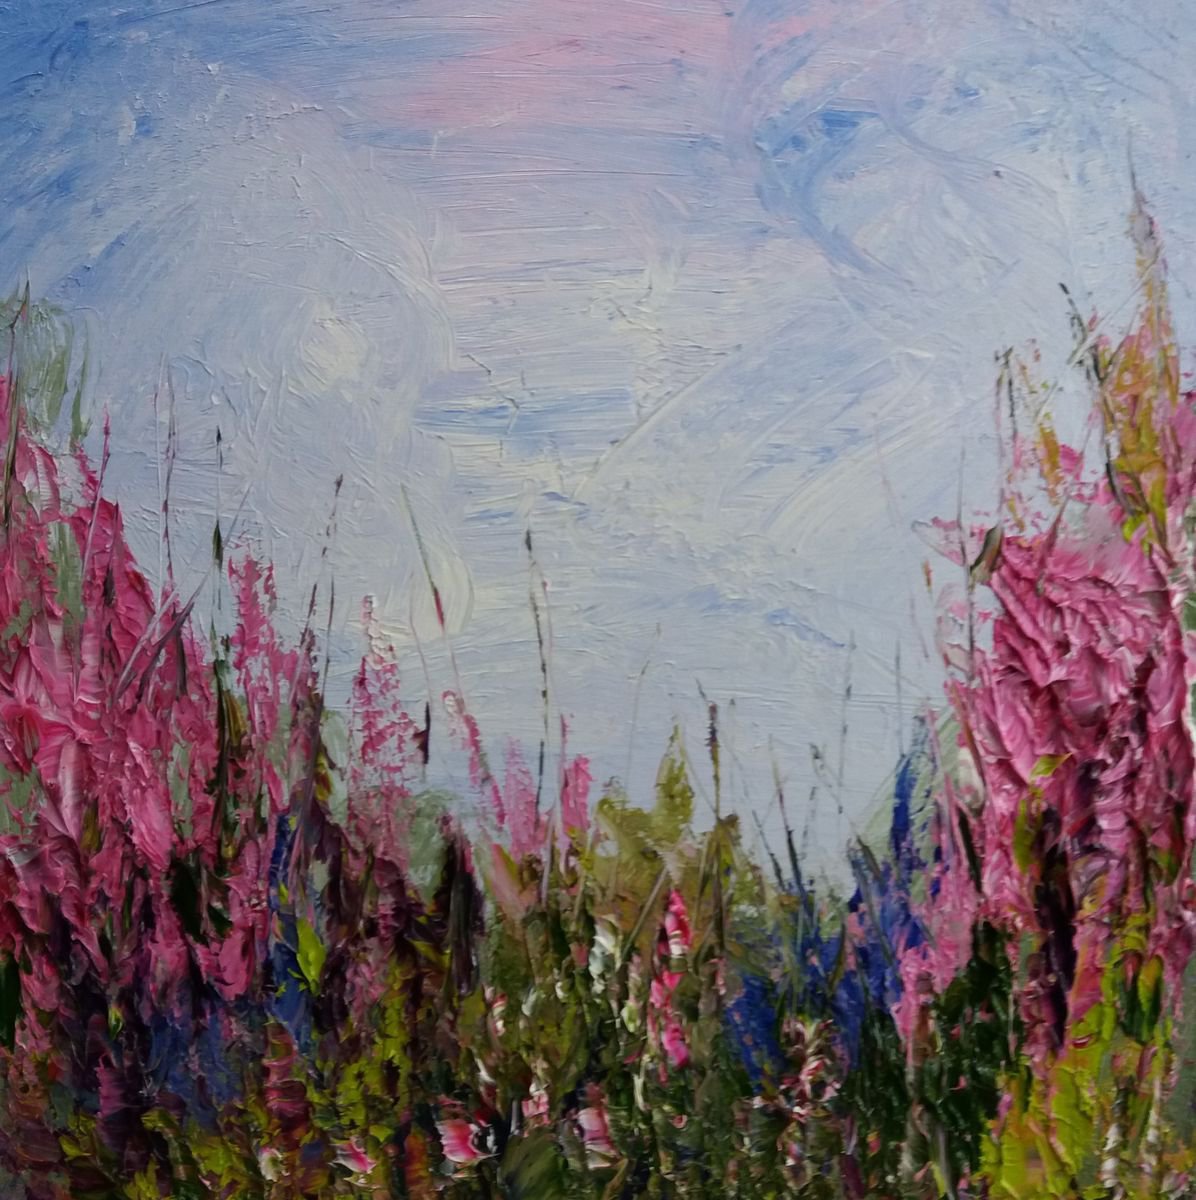 Essence of Summer - A Textured Abstract Landscape by Marjory Sime by Marjory Sime